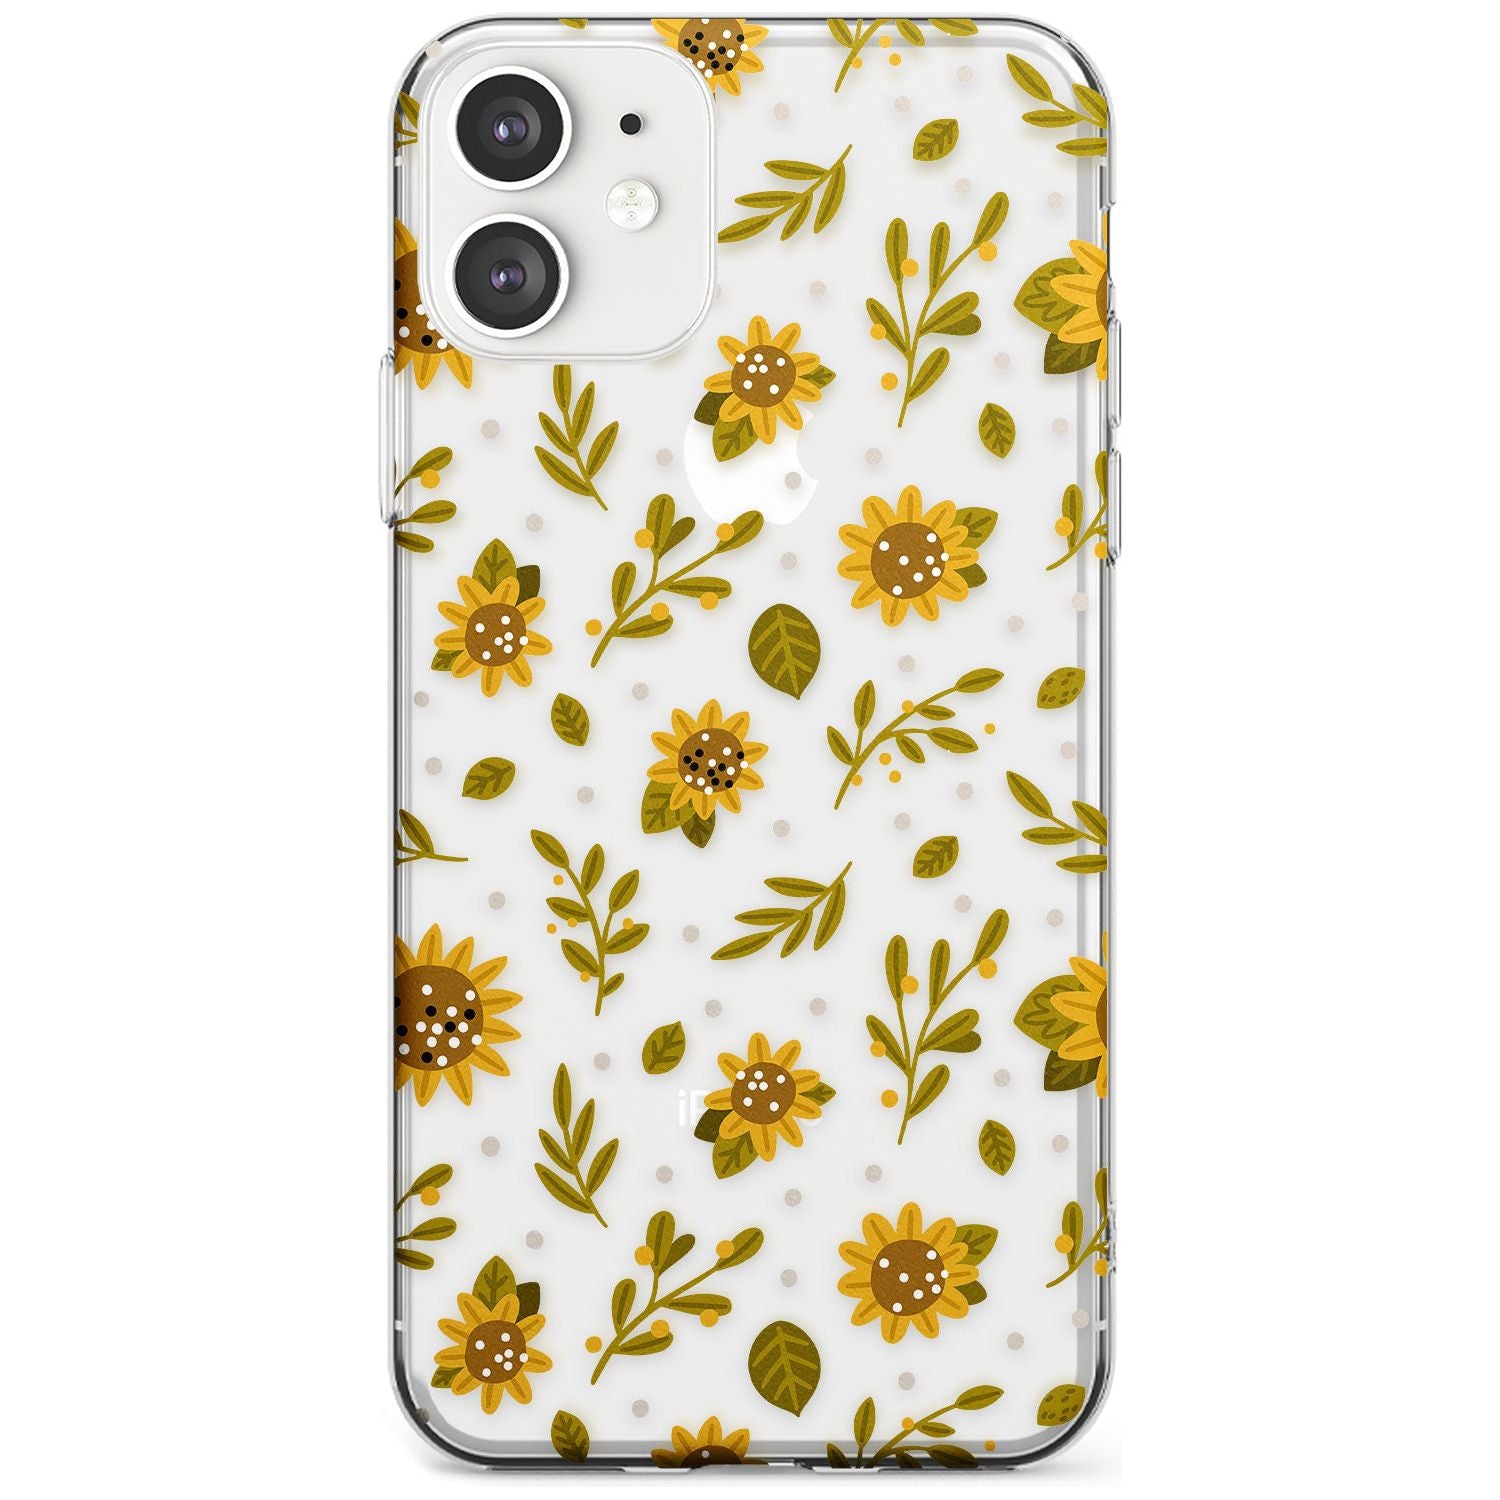 Sweet as Honey Patterns: Sunflowers (Clear) Slim TPU Phone Case for iPhone 11